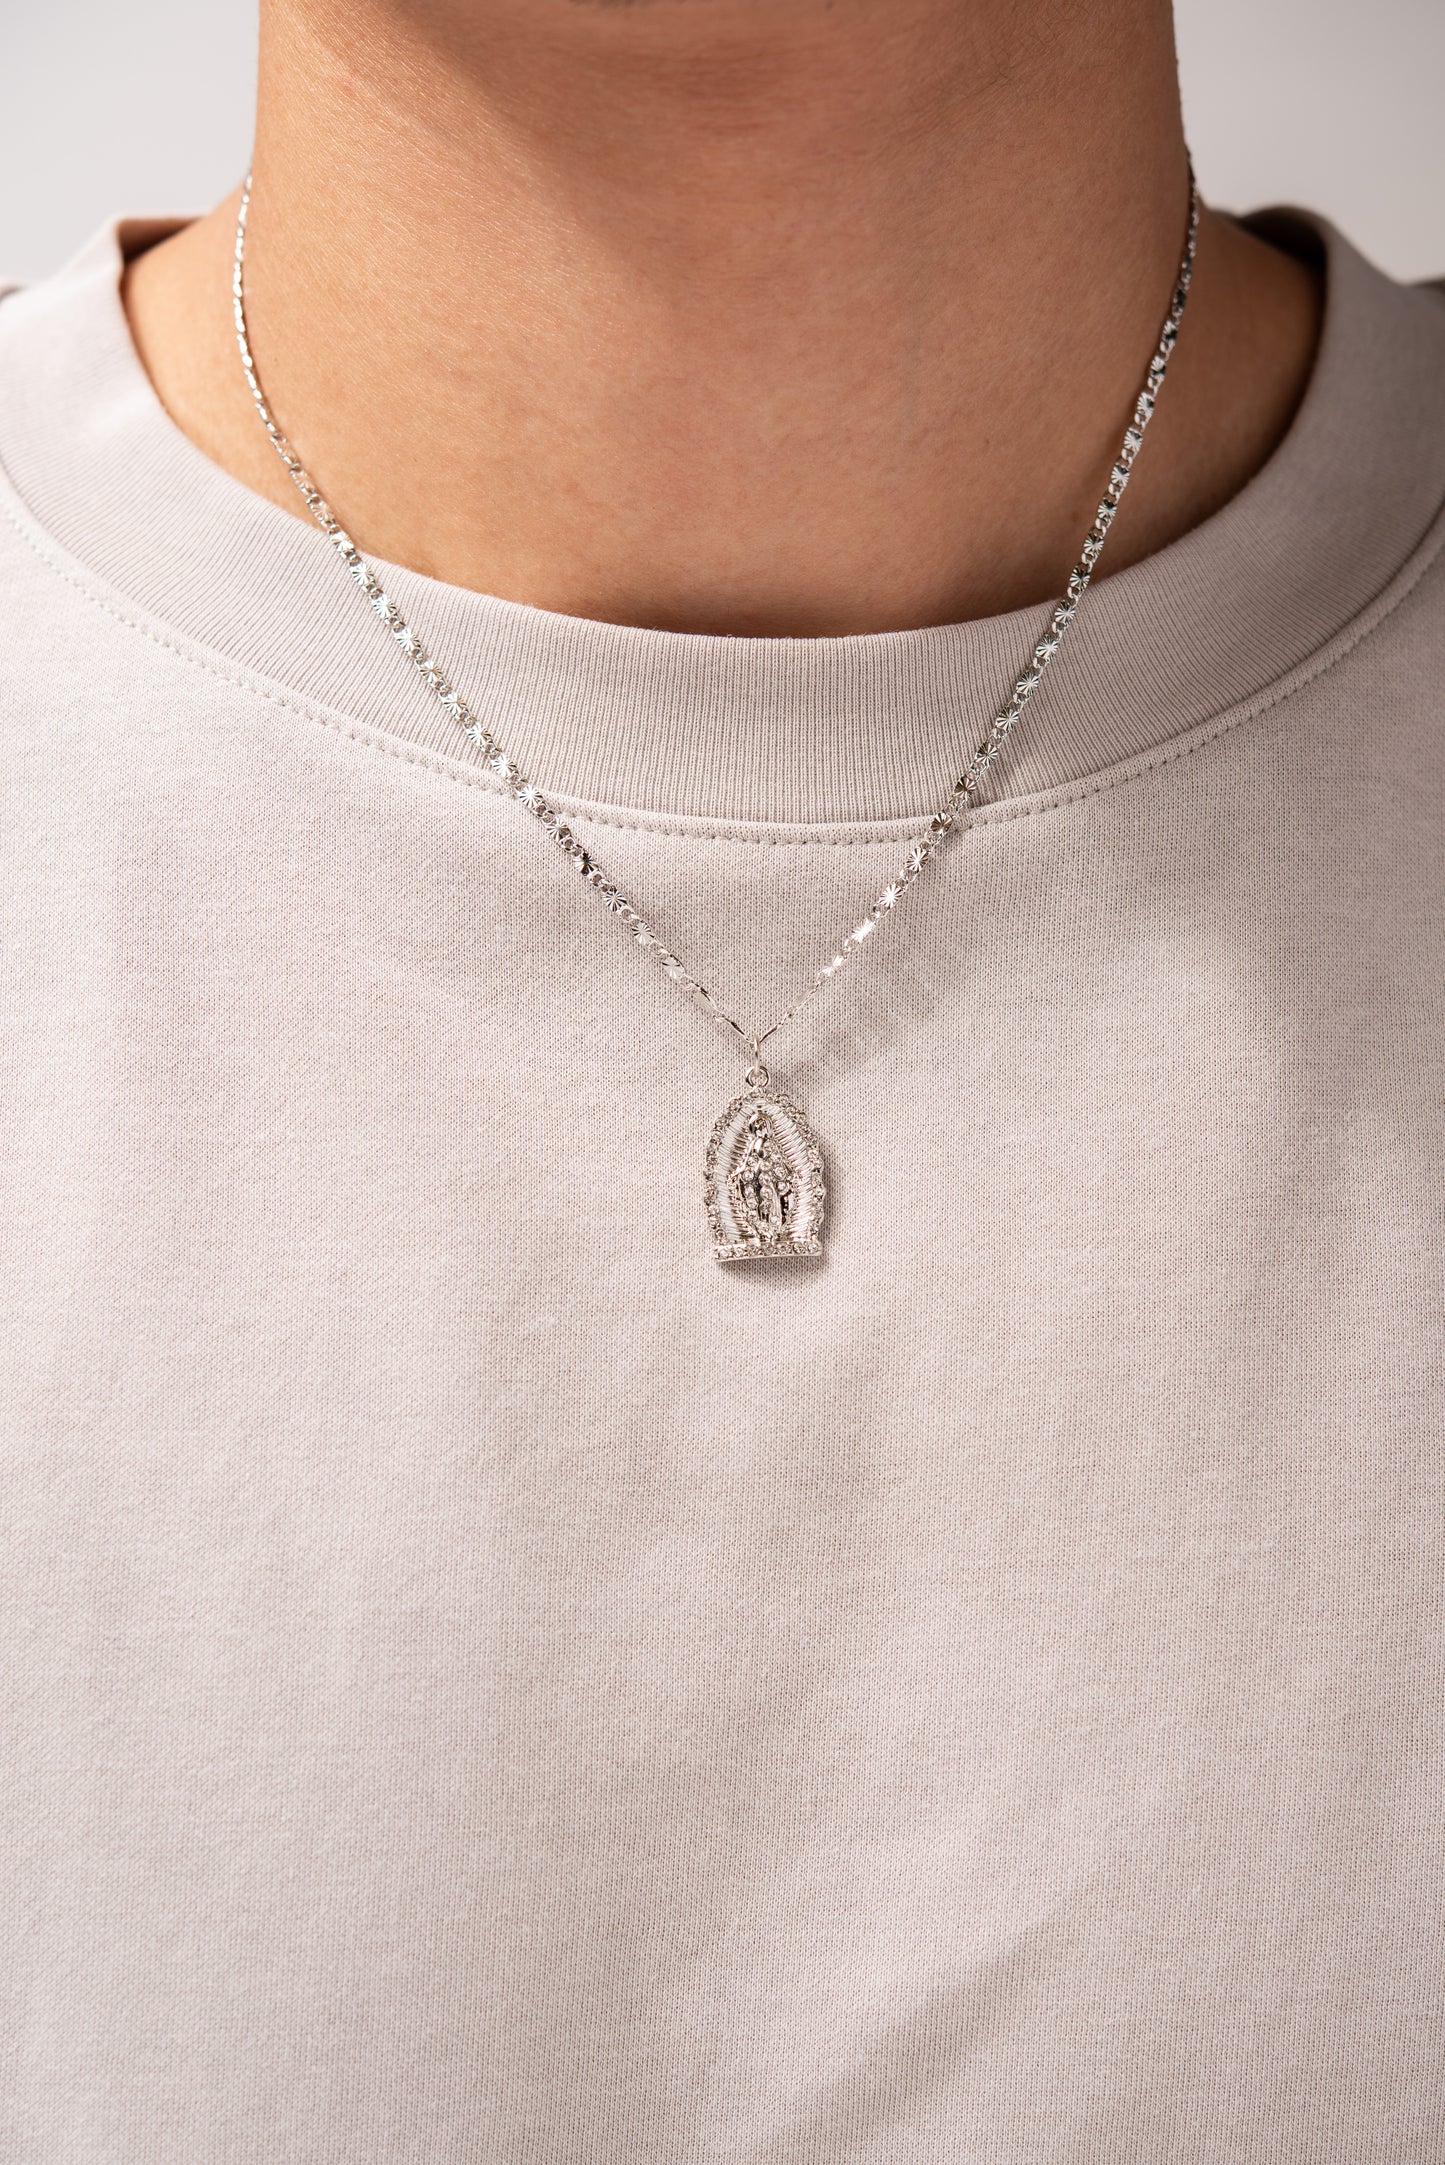 Chain Necklace with Large Jesus Pendant - Silver